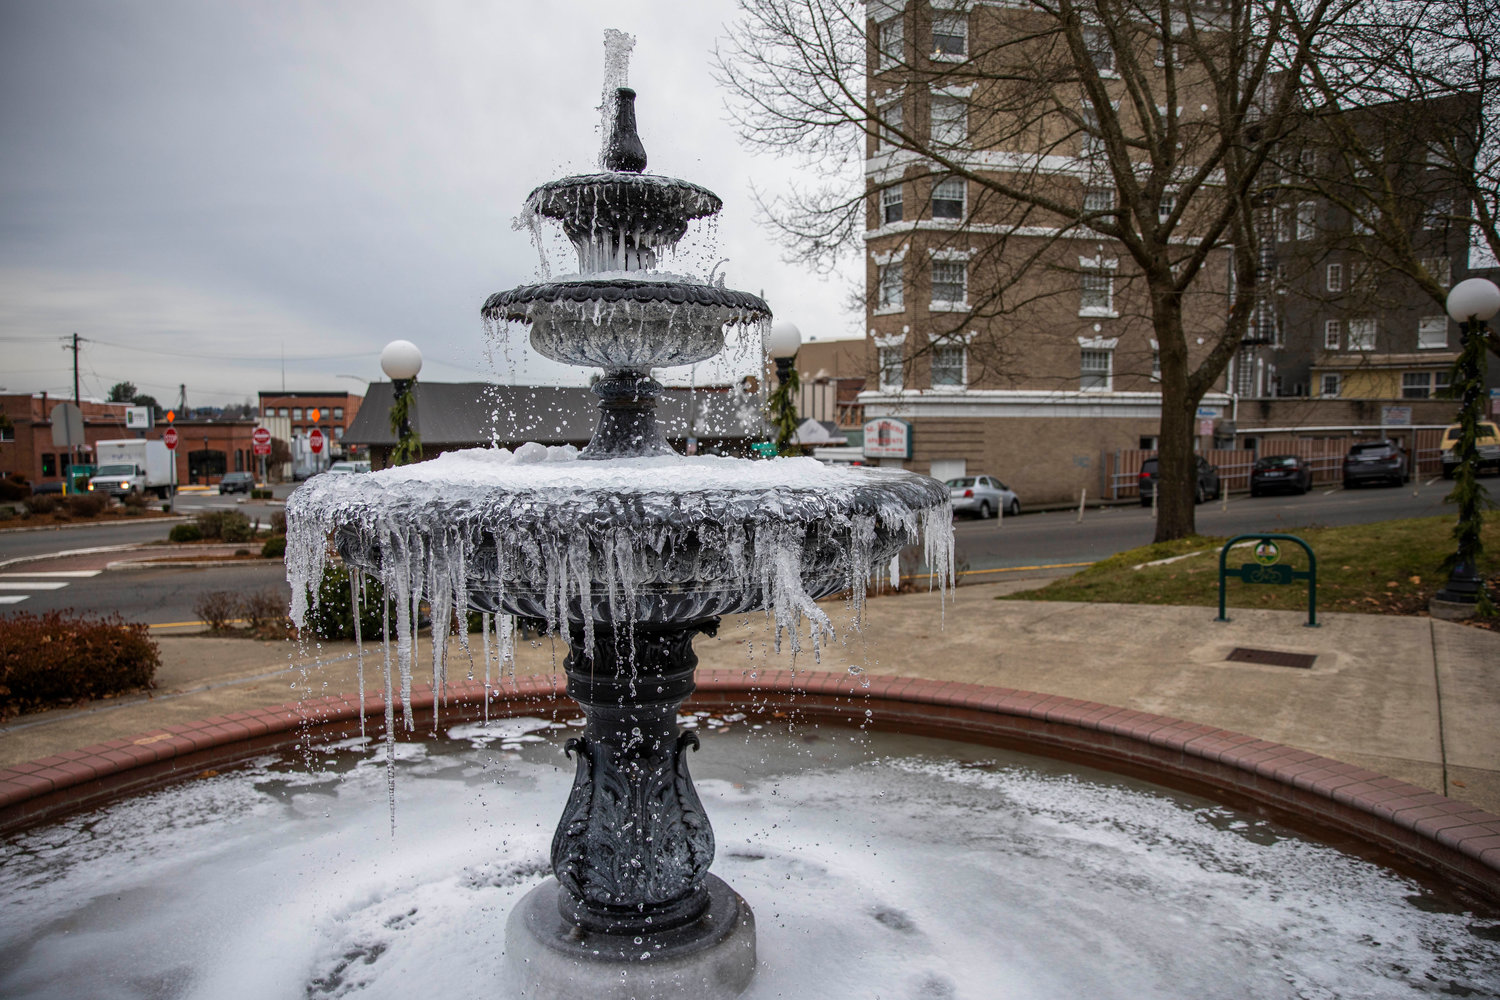 FILE PHOTO — Water continues to fall as icicles form on the fountain outside the Vernetta Smith Chehalis Timberland Library in December 2022.